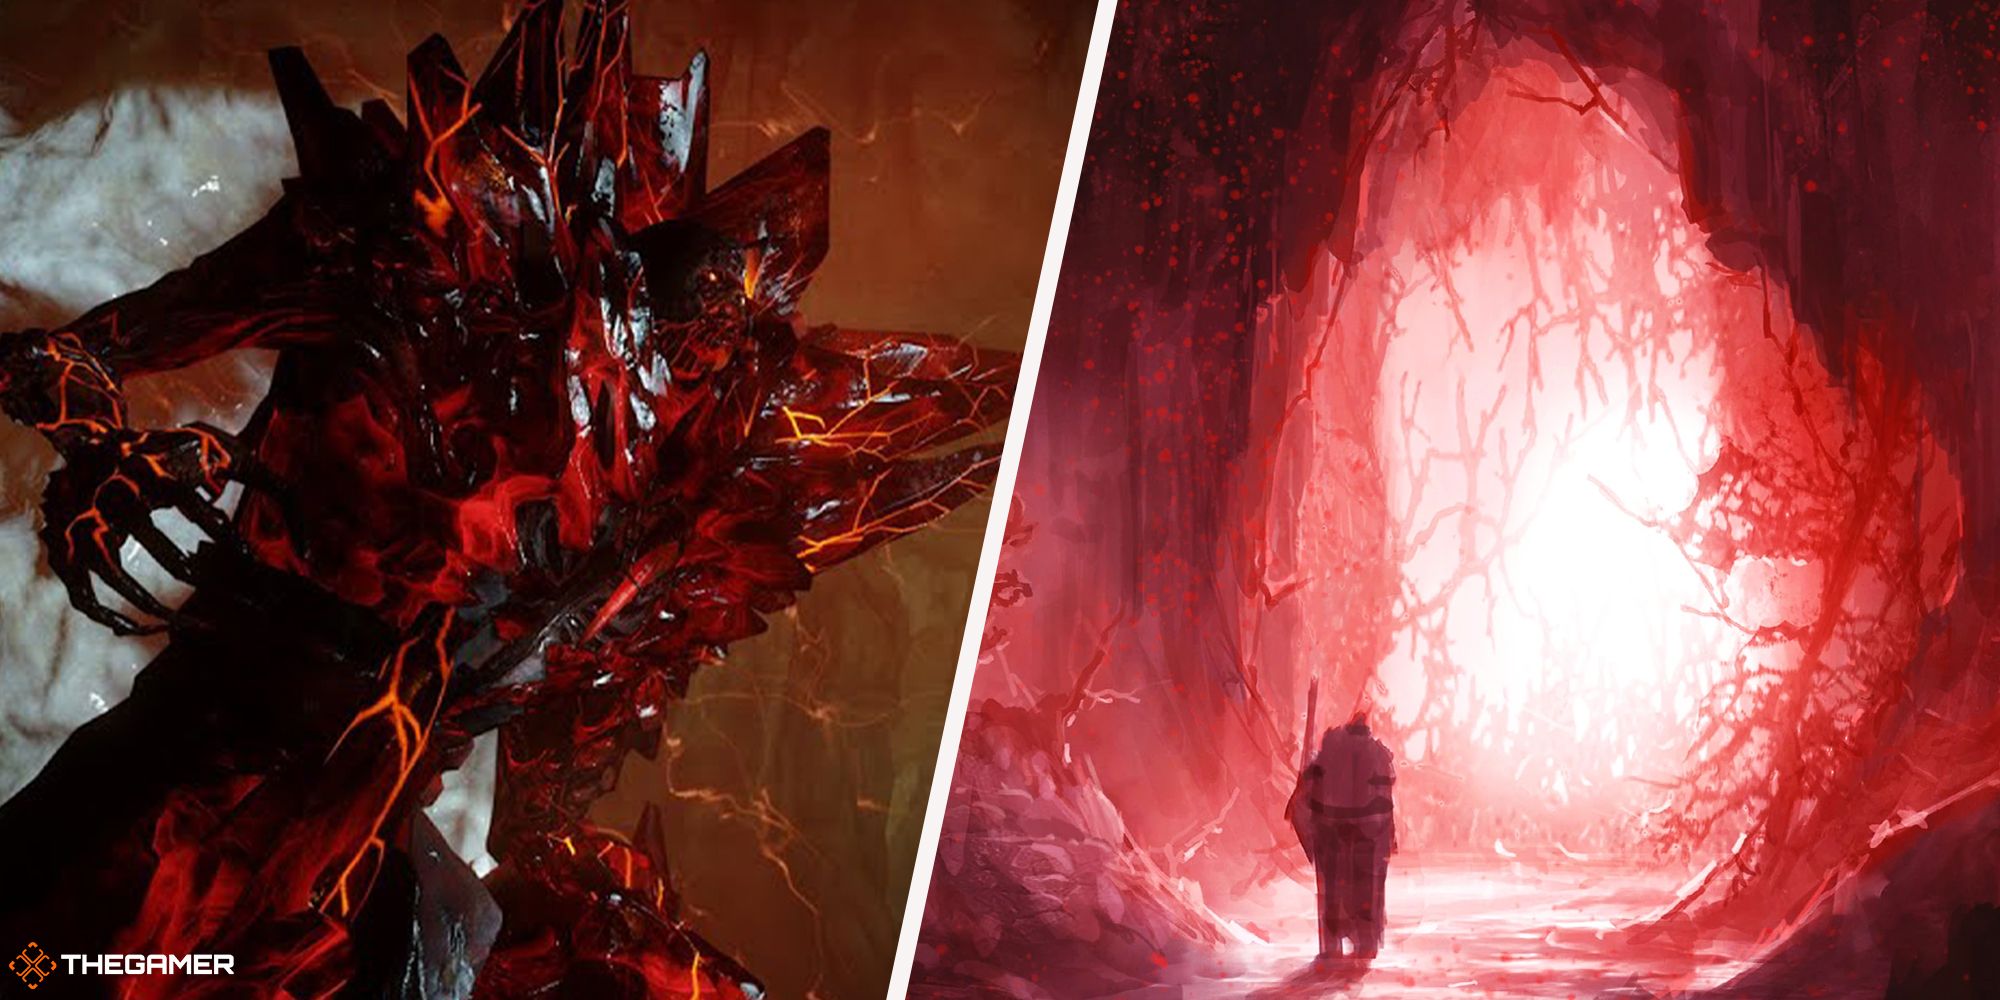 Dragon Age - red lyrium veins on right (concept art), behemoth from Dragon Age: Inquisition on left